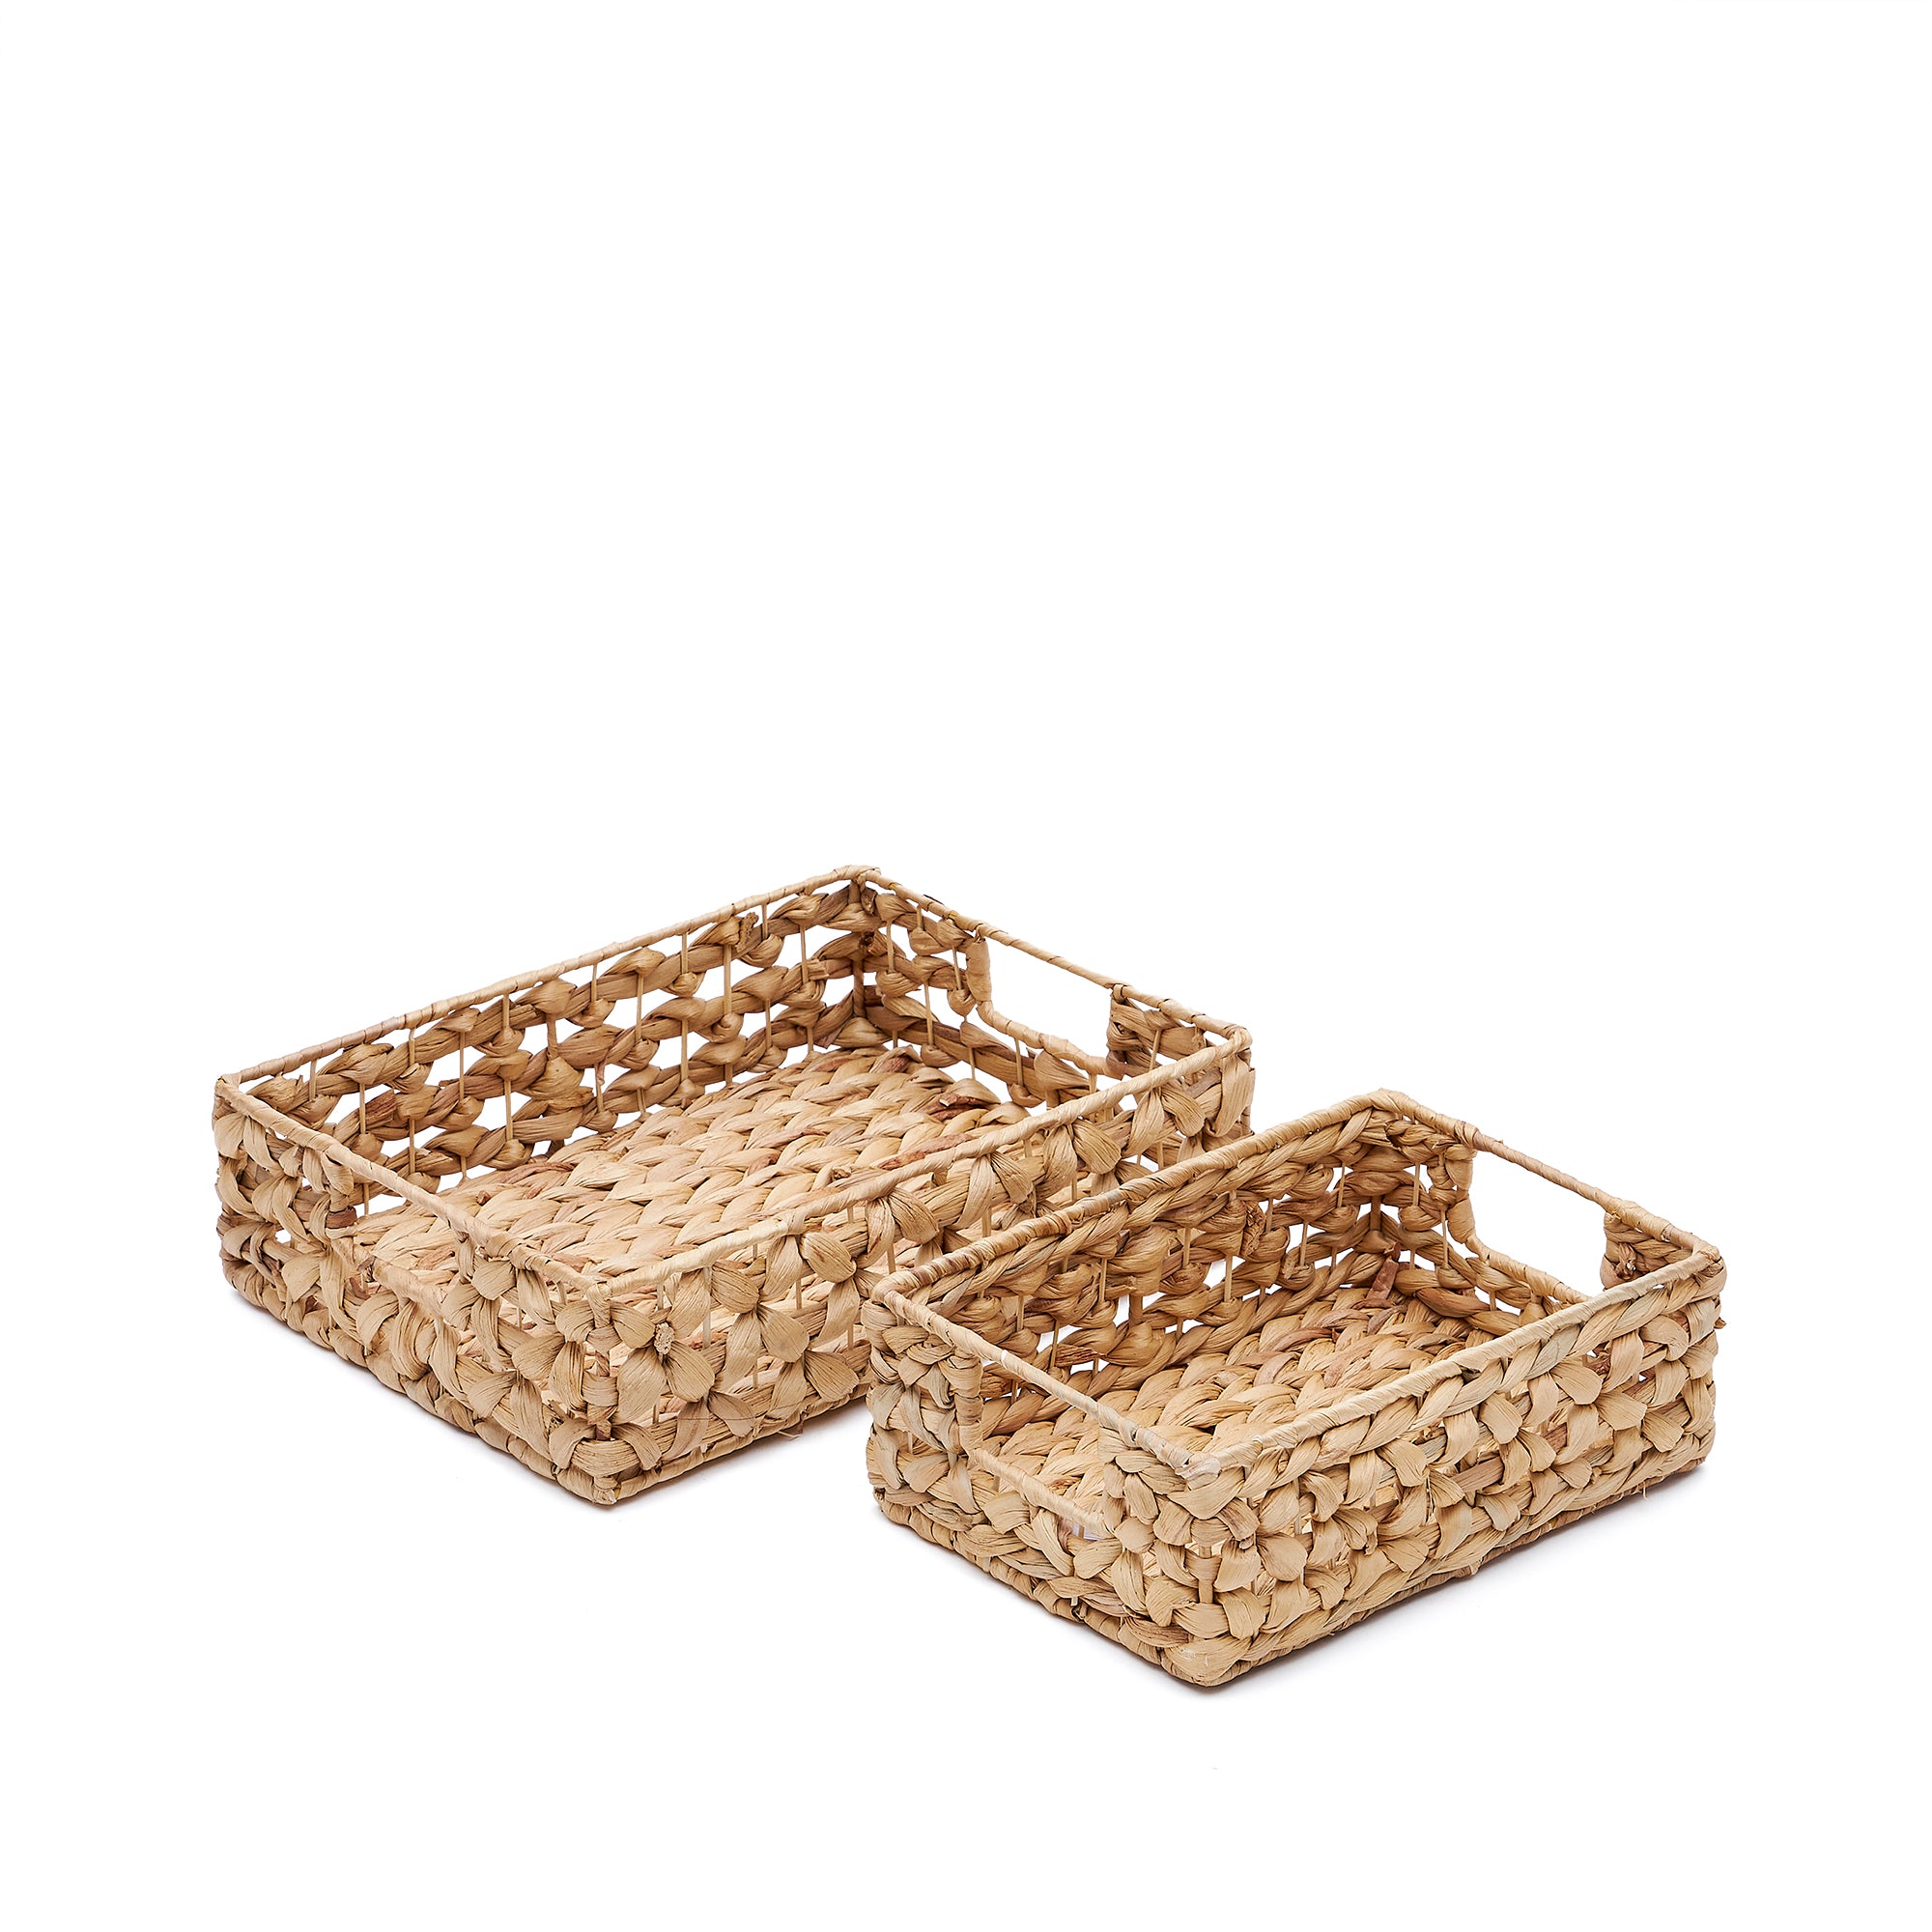 Set of 2 boxes made with natural fibres 27 x 20 cm / 36 x 27 cm